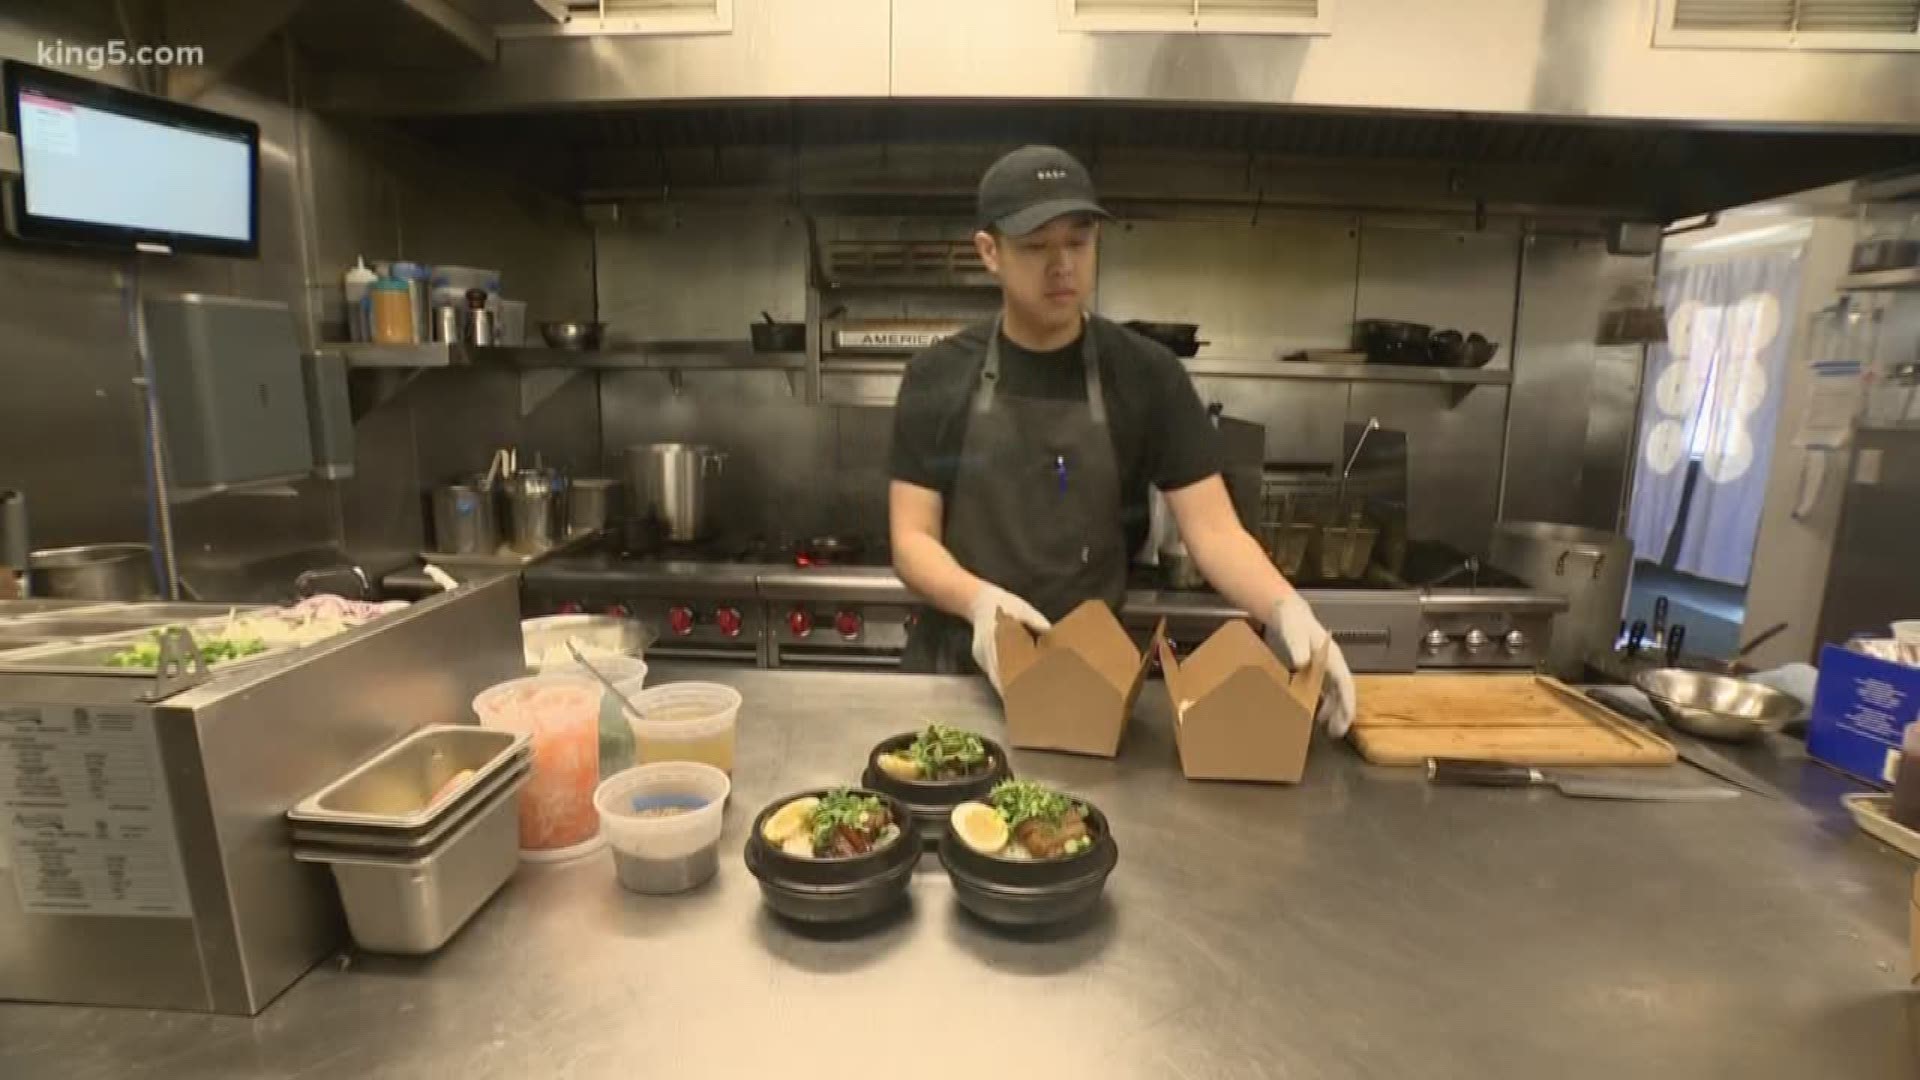 Ba Sa restaurant, which specializes in Vietnamese and Southeast Asian cuisine, is also selling the bowls for just $5.